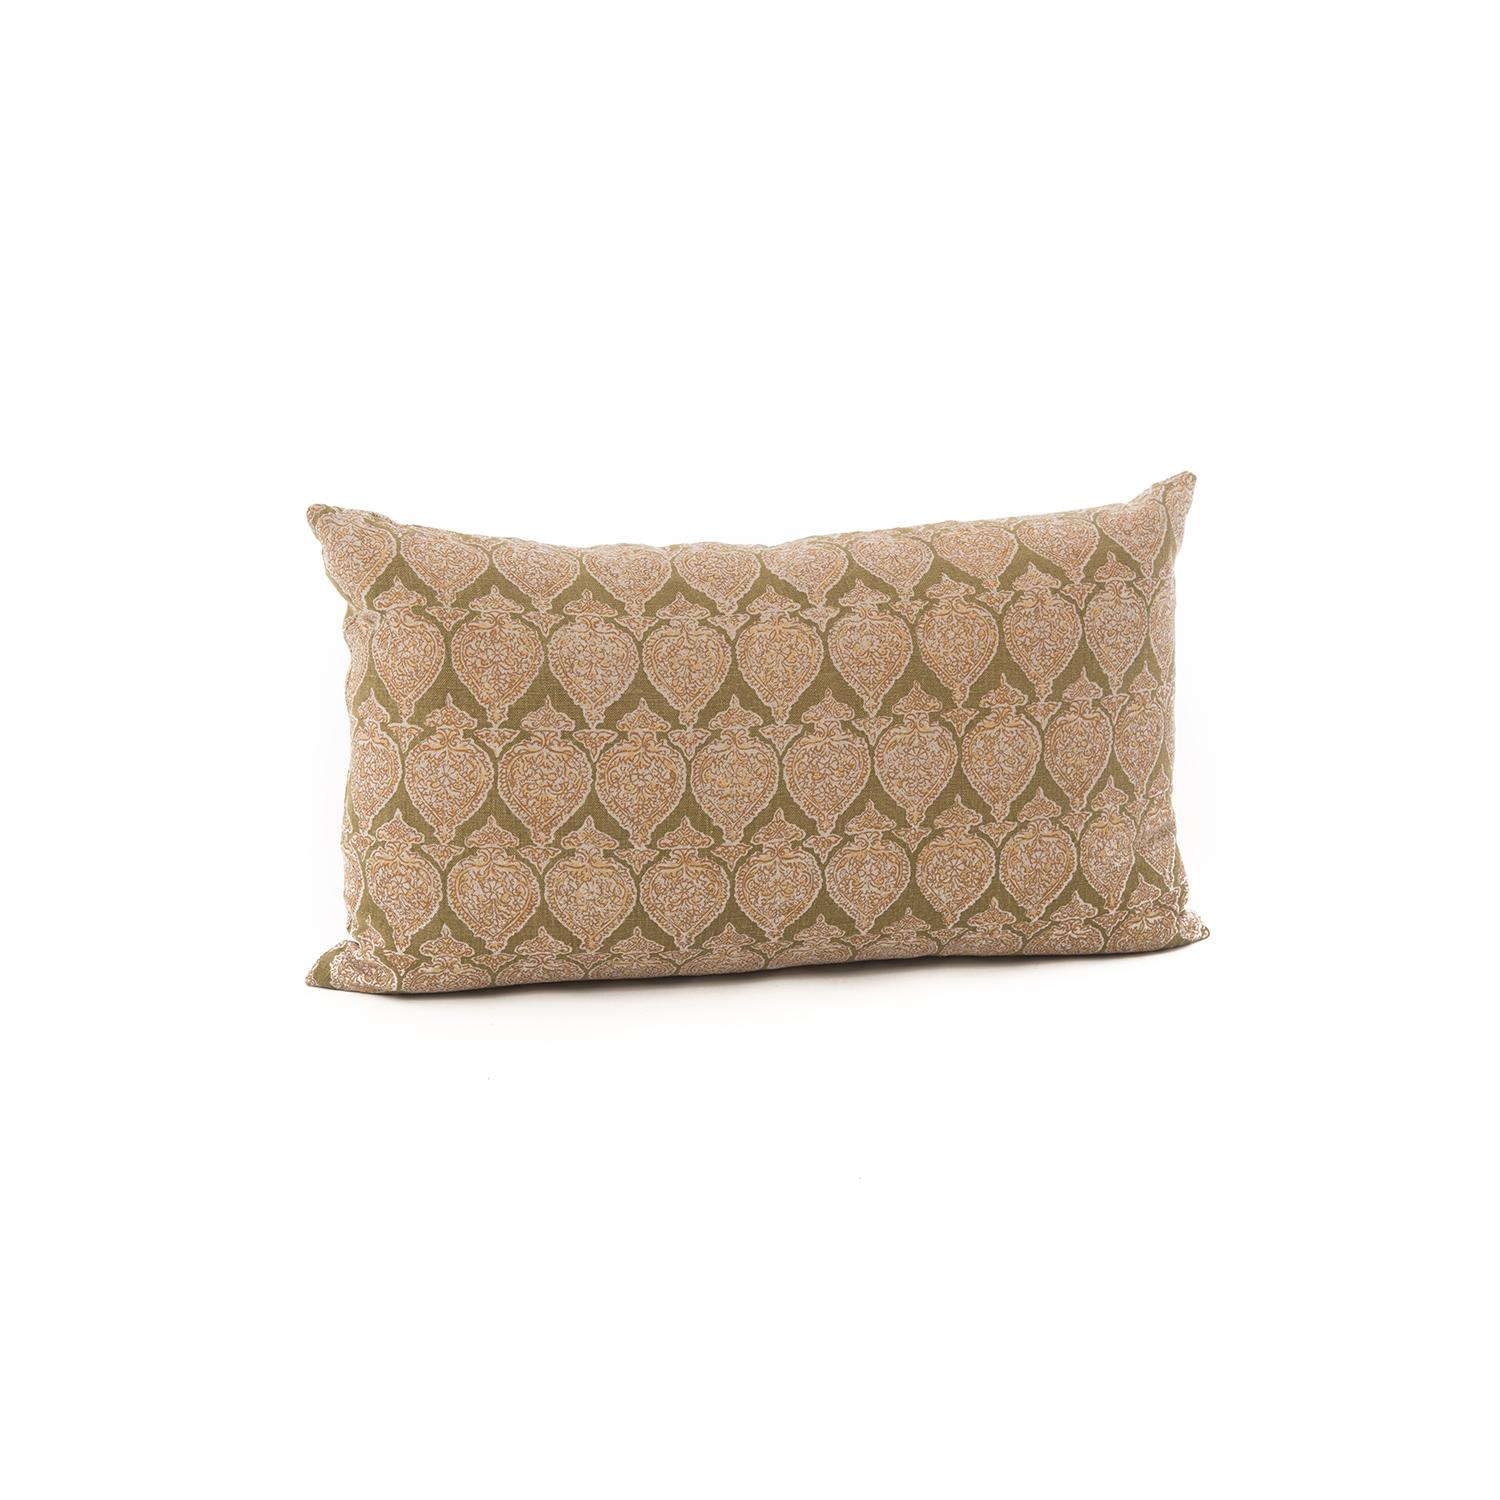 A linen and down filled lumbar pillow made for Danish teak Classics by American designer Anne Klemm Rogers. The Raoul textiles fabric showcases a woven sari pattern.